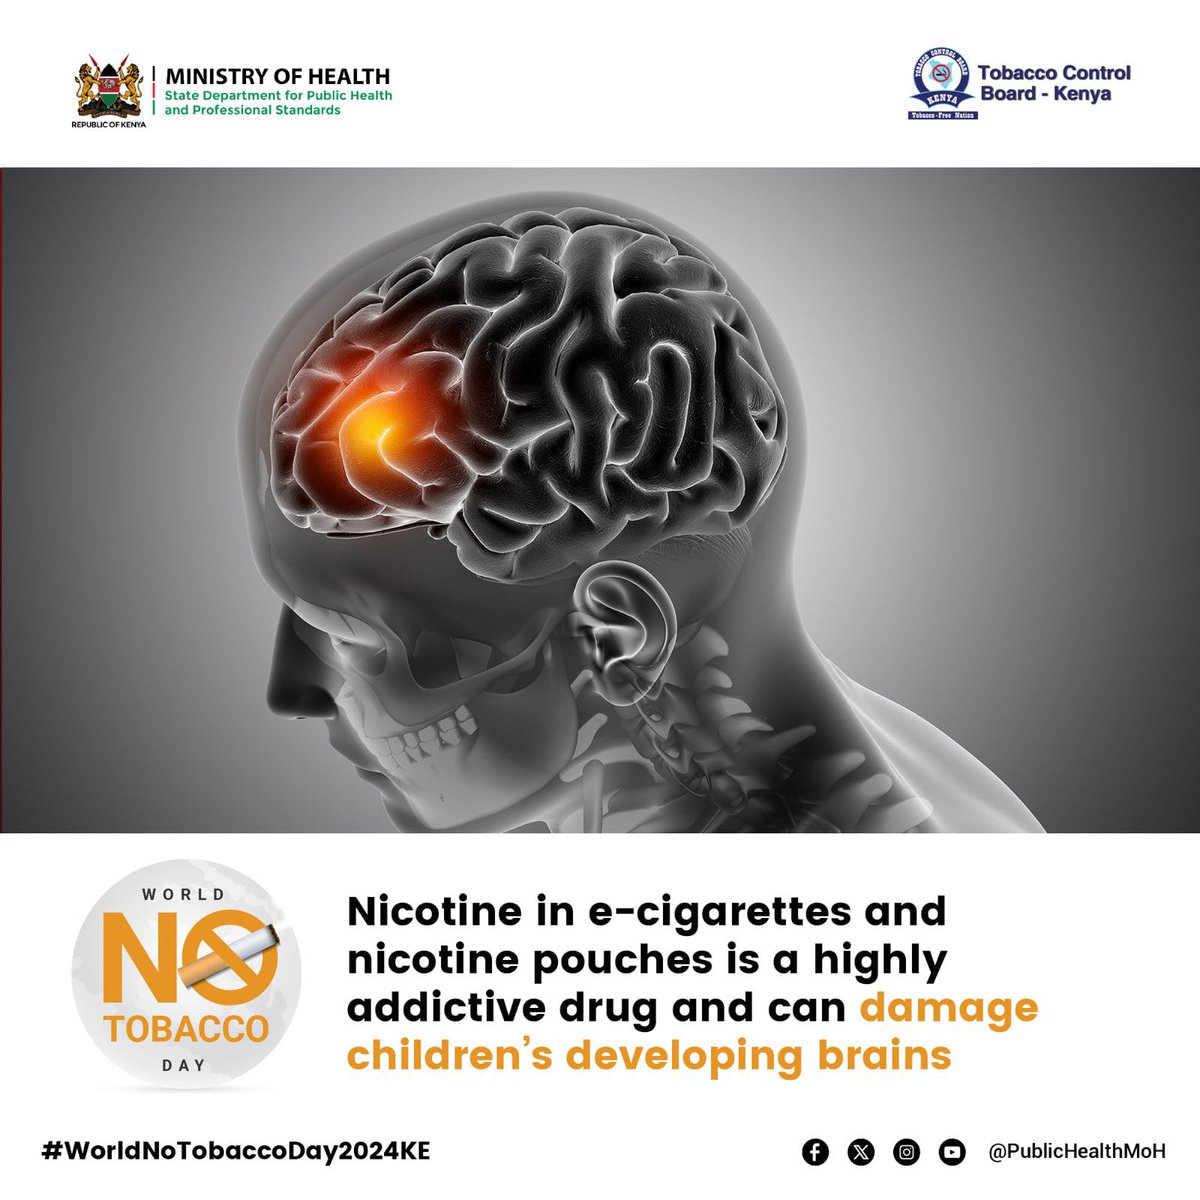 Myth: E-cigarettes and nicotine pouches are safer than cigarettes.

Reality: They are not safe. Both deliver nicotine, a toxic substance, along with other harmful chemicals that pose serious health risks.
#WorldNoTobaccoDay2024KE